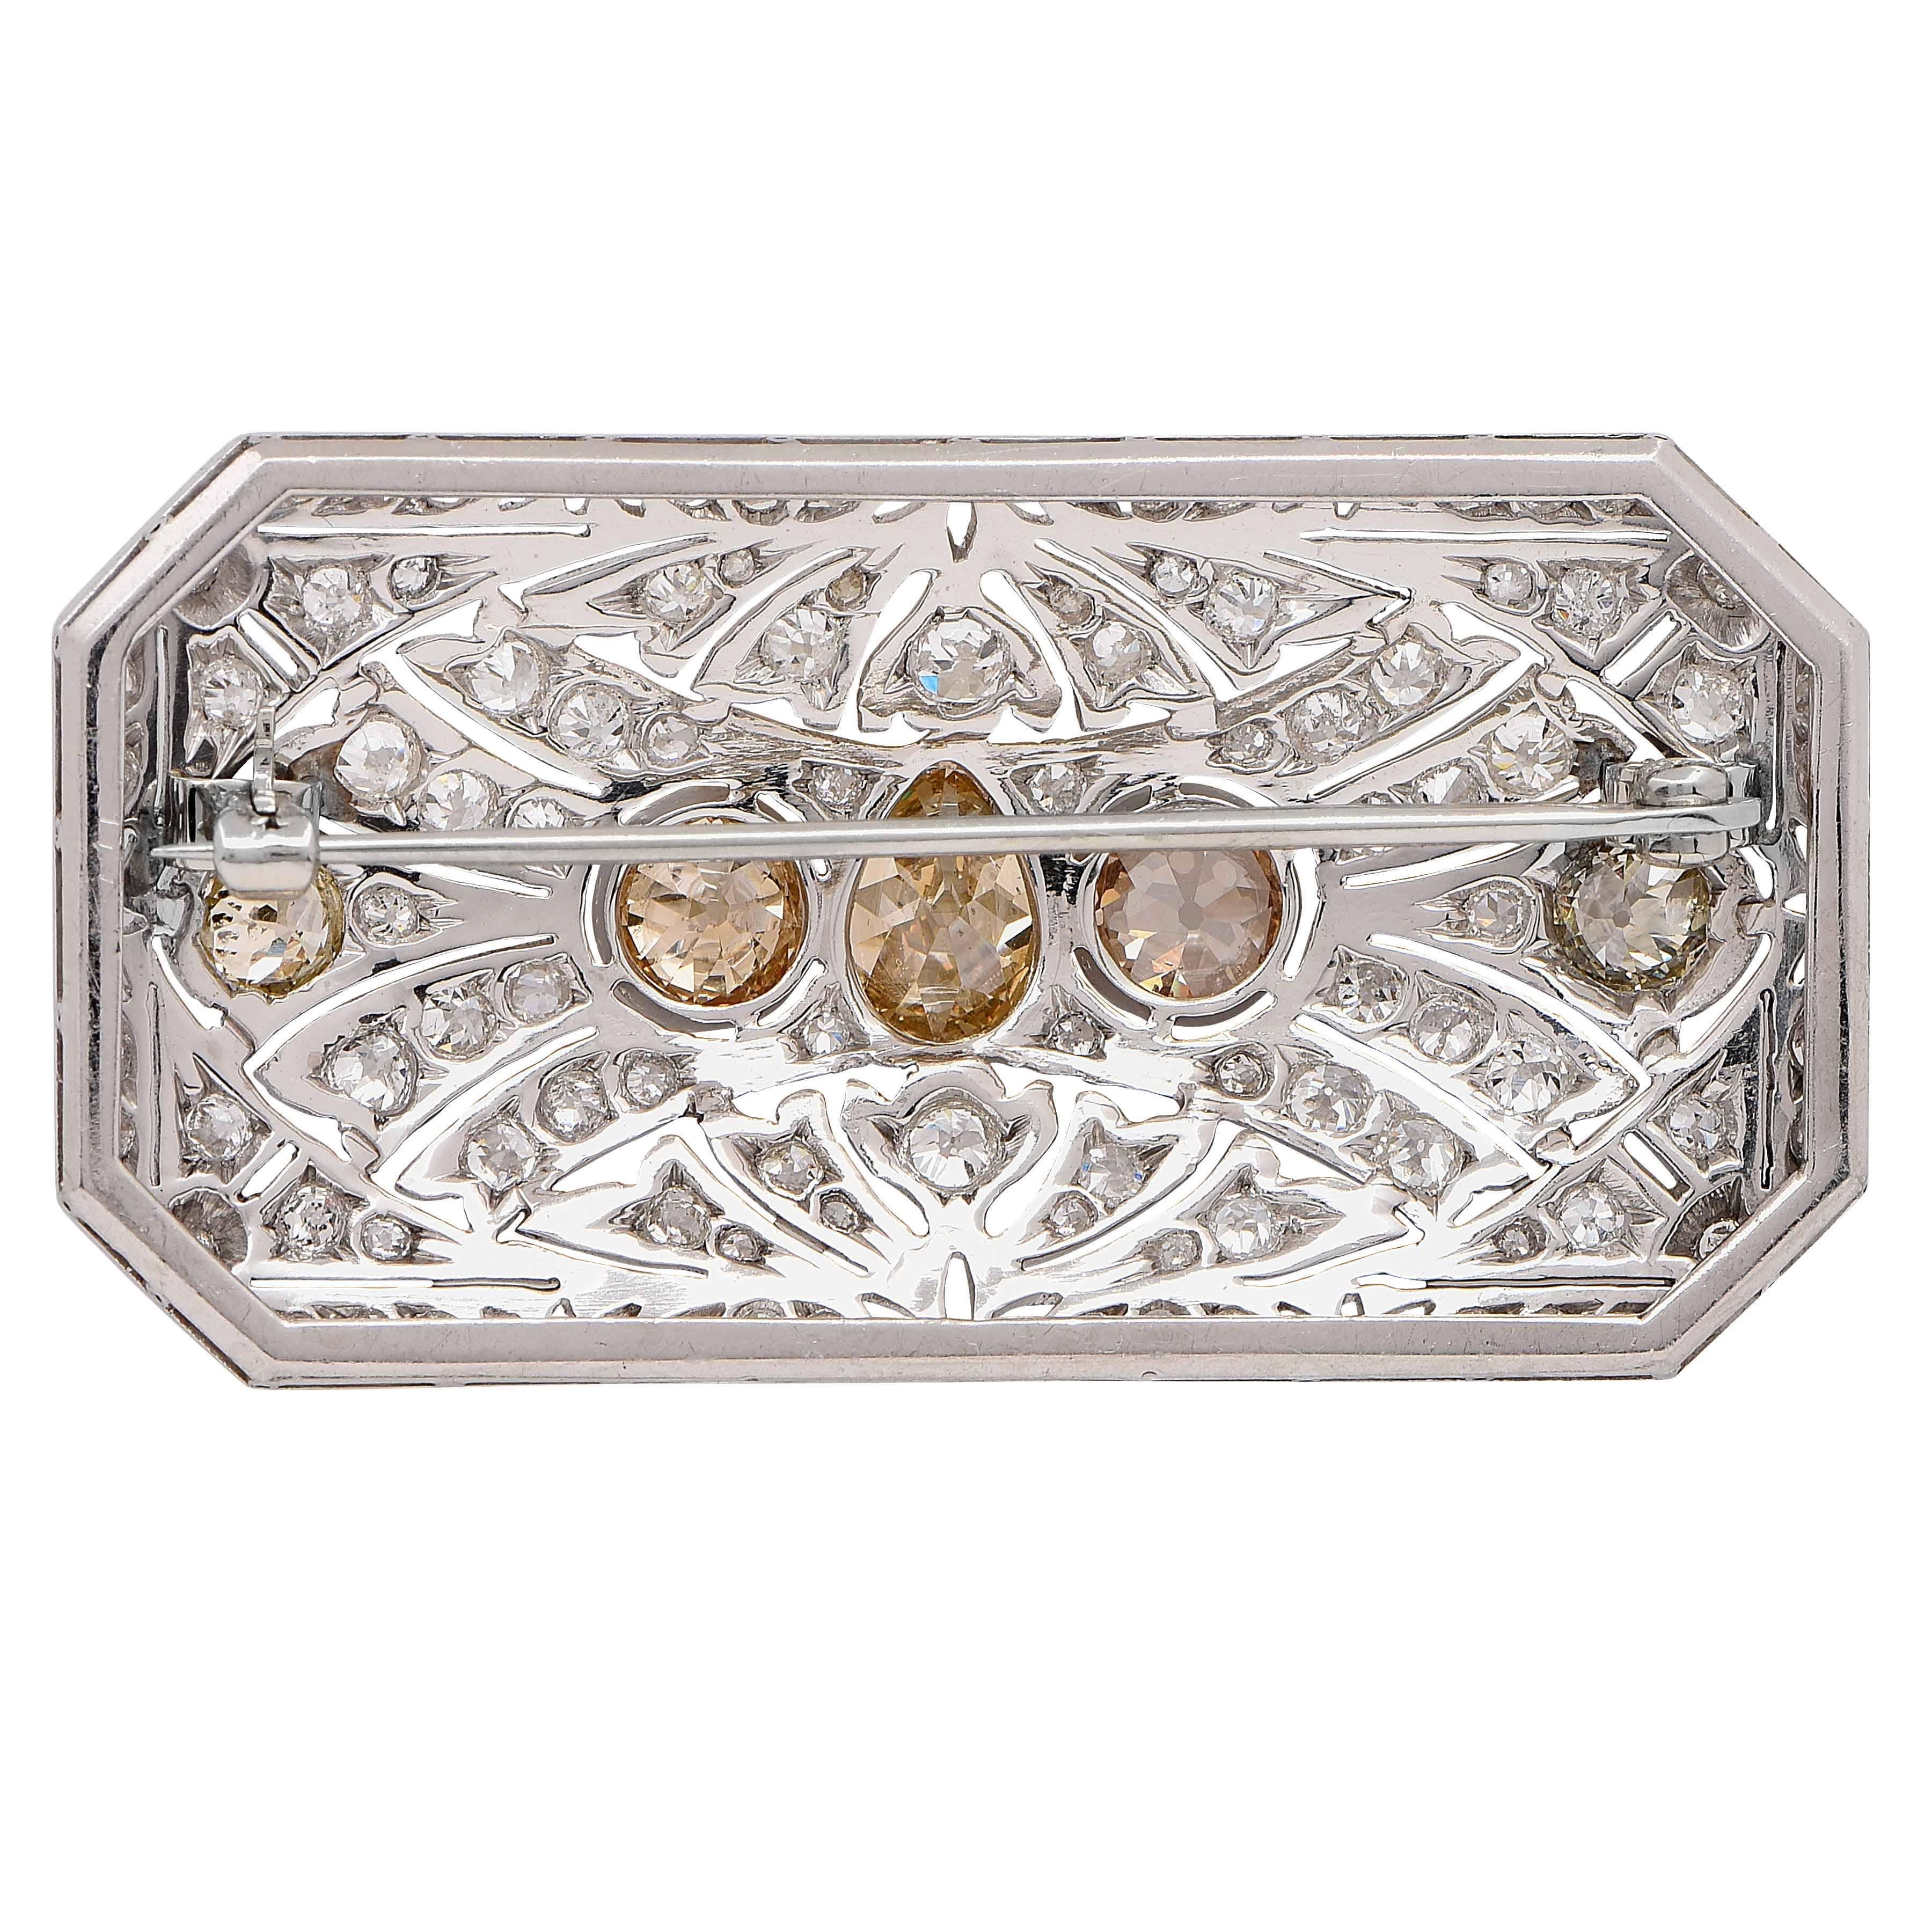 Circa 1925 Art Deco Platinum Brooch featuring 5 fancy colored mix cut diamonds with an estimated total weight of 3.25 carats and 96 mix cut G/H color diamonds with an estimated total weight of 2.65 carats. 

Metal Type: Platinum (tested and/or